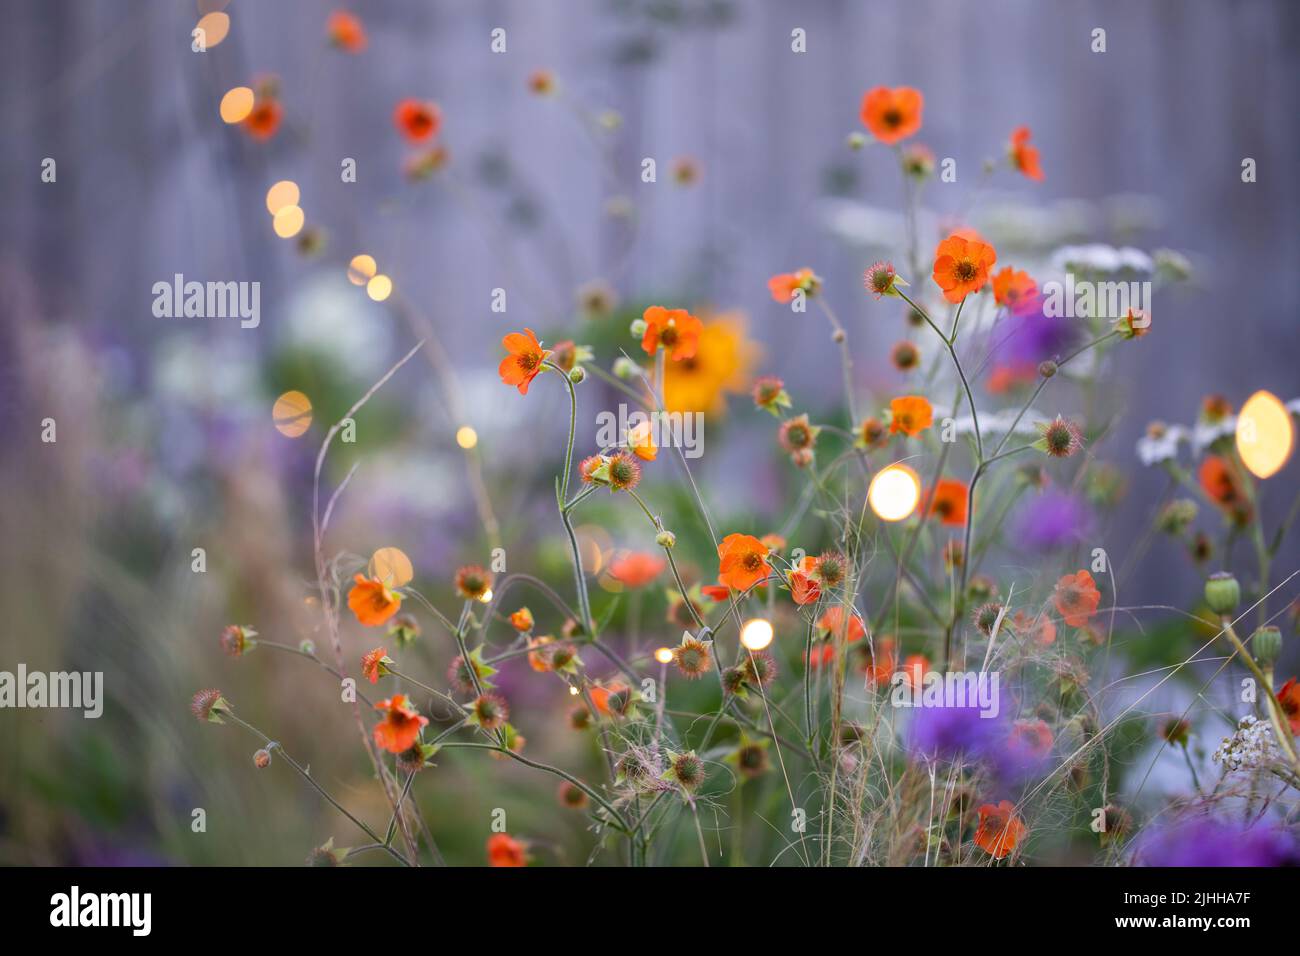 Geum tangerine  with fairy lights, shallow depth of field Stock Photo